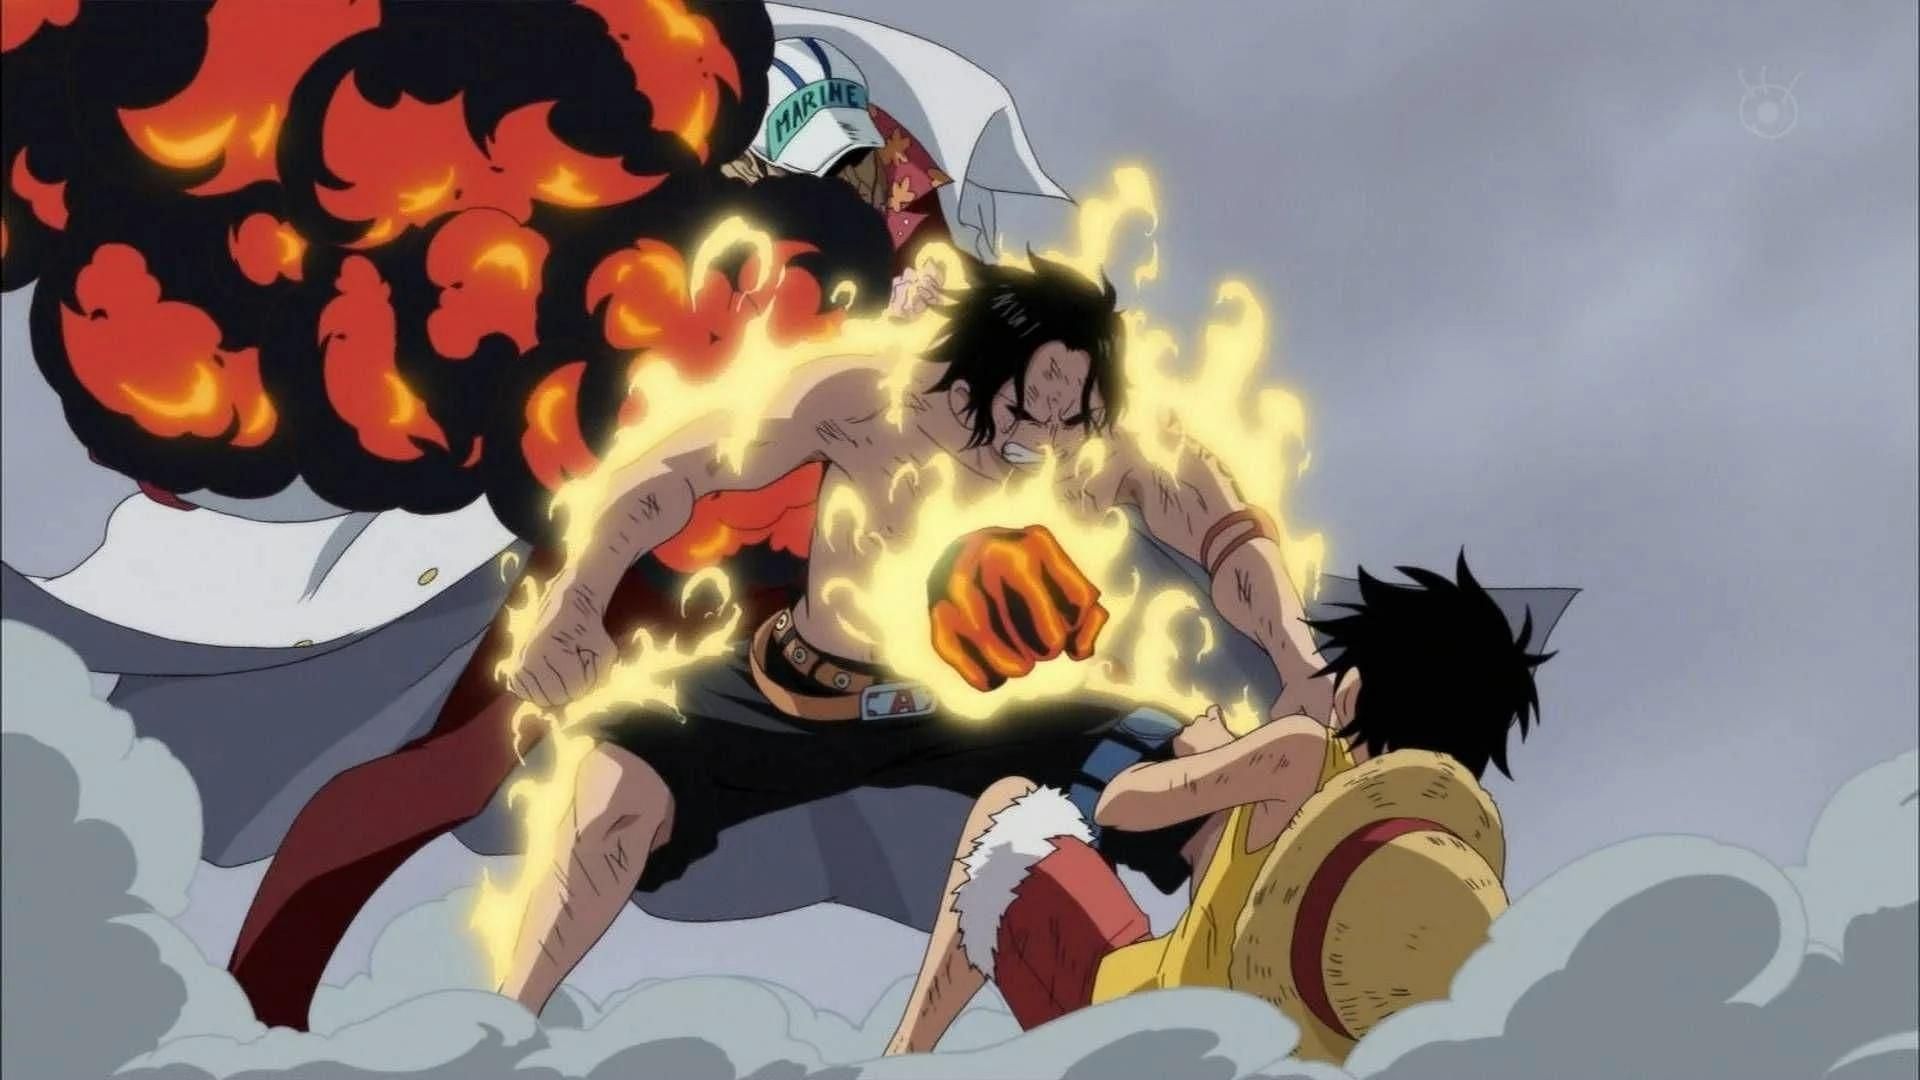 Ace comes in between Akainu&#039;s attack to save Luffy (Image via Toei Animation)